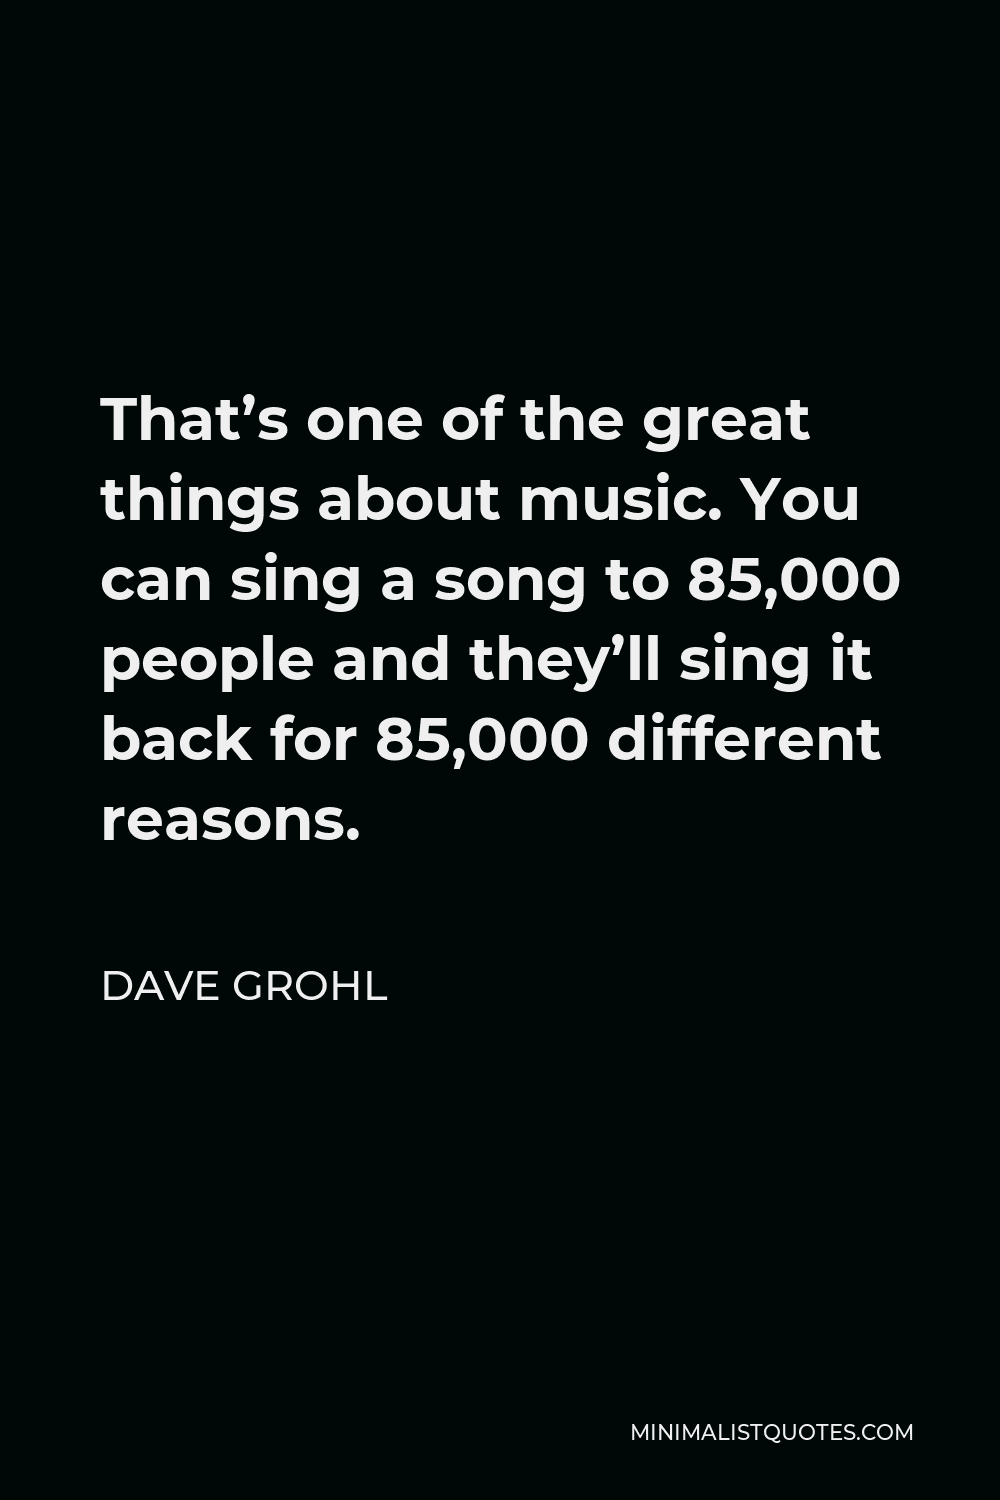 Dave Grohl Quote - That’s one of the great things about music. You can sing a song to 85,000 people and they’ll sing it back for 85,000 different reasons.